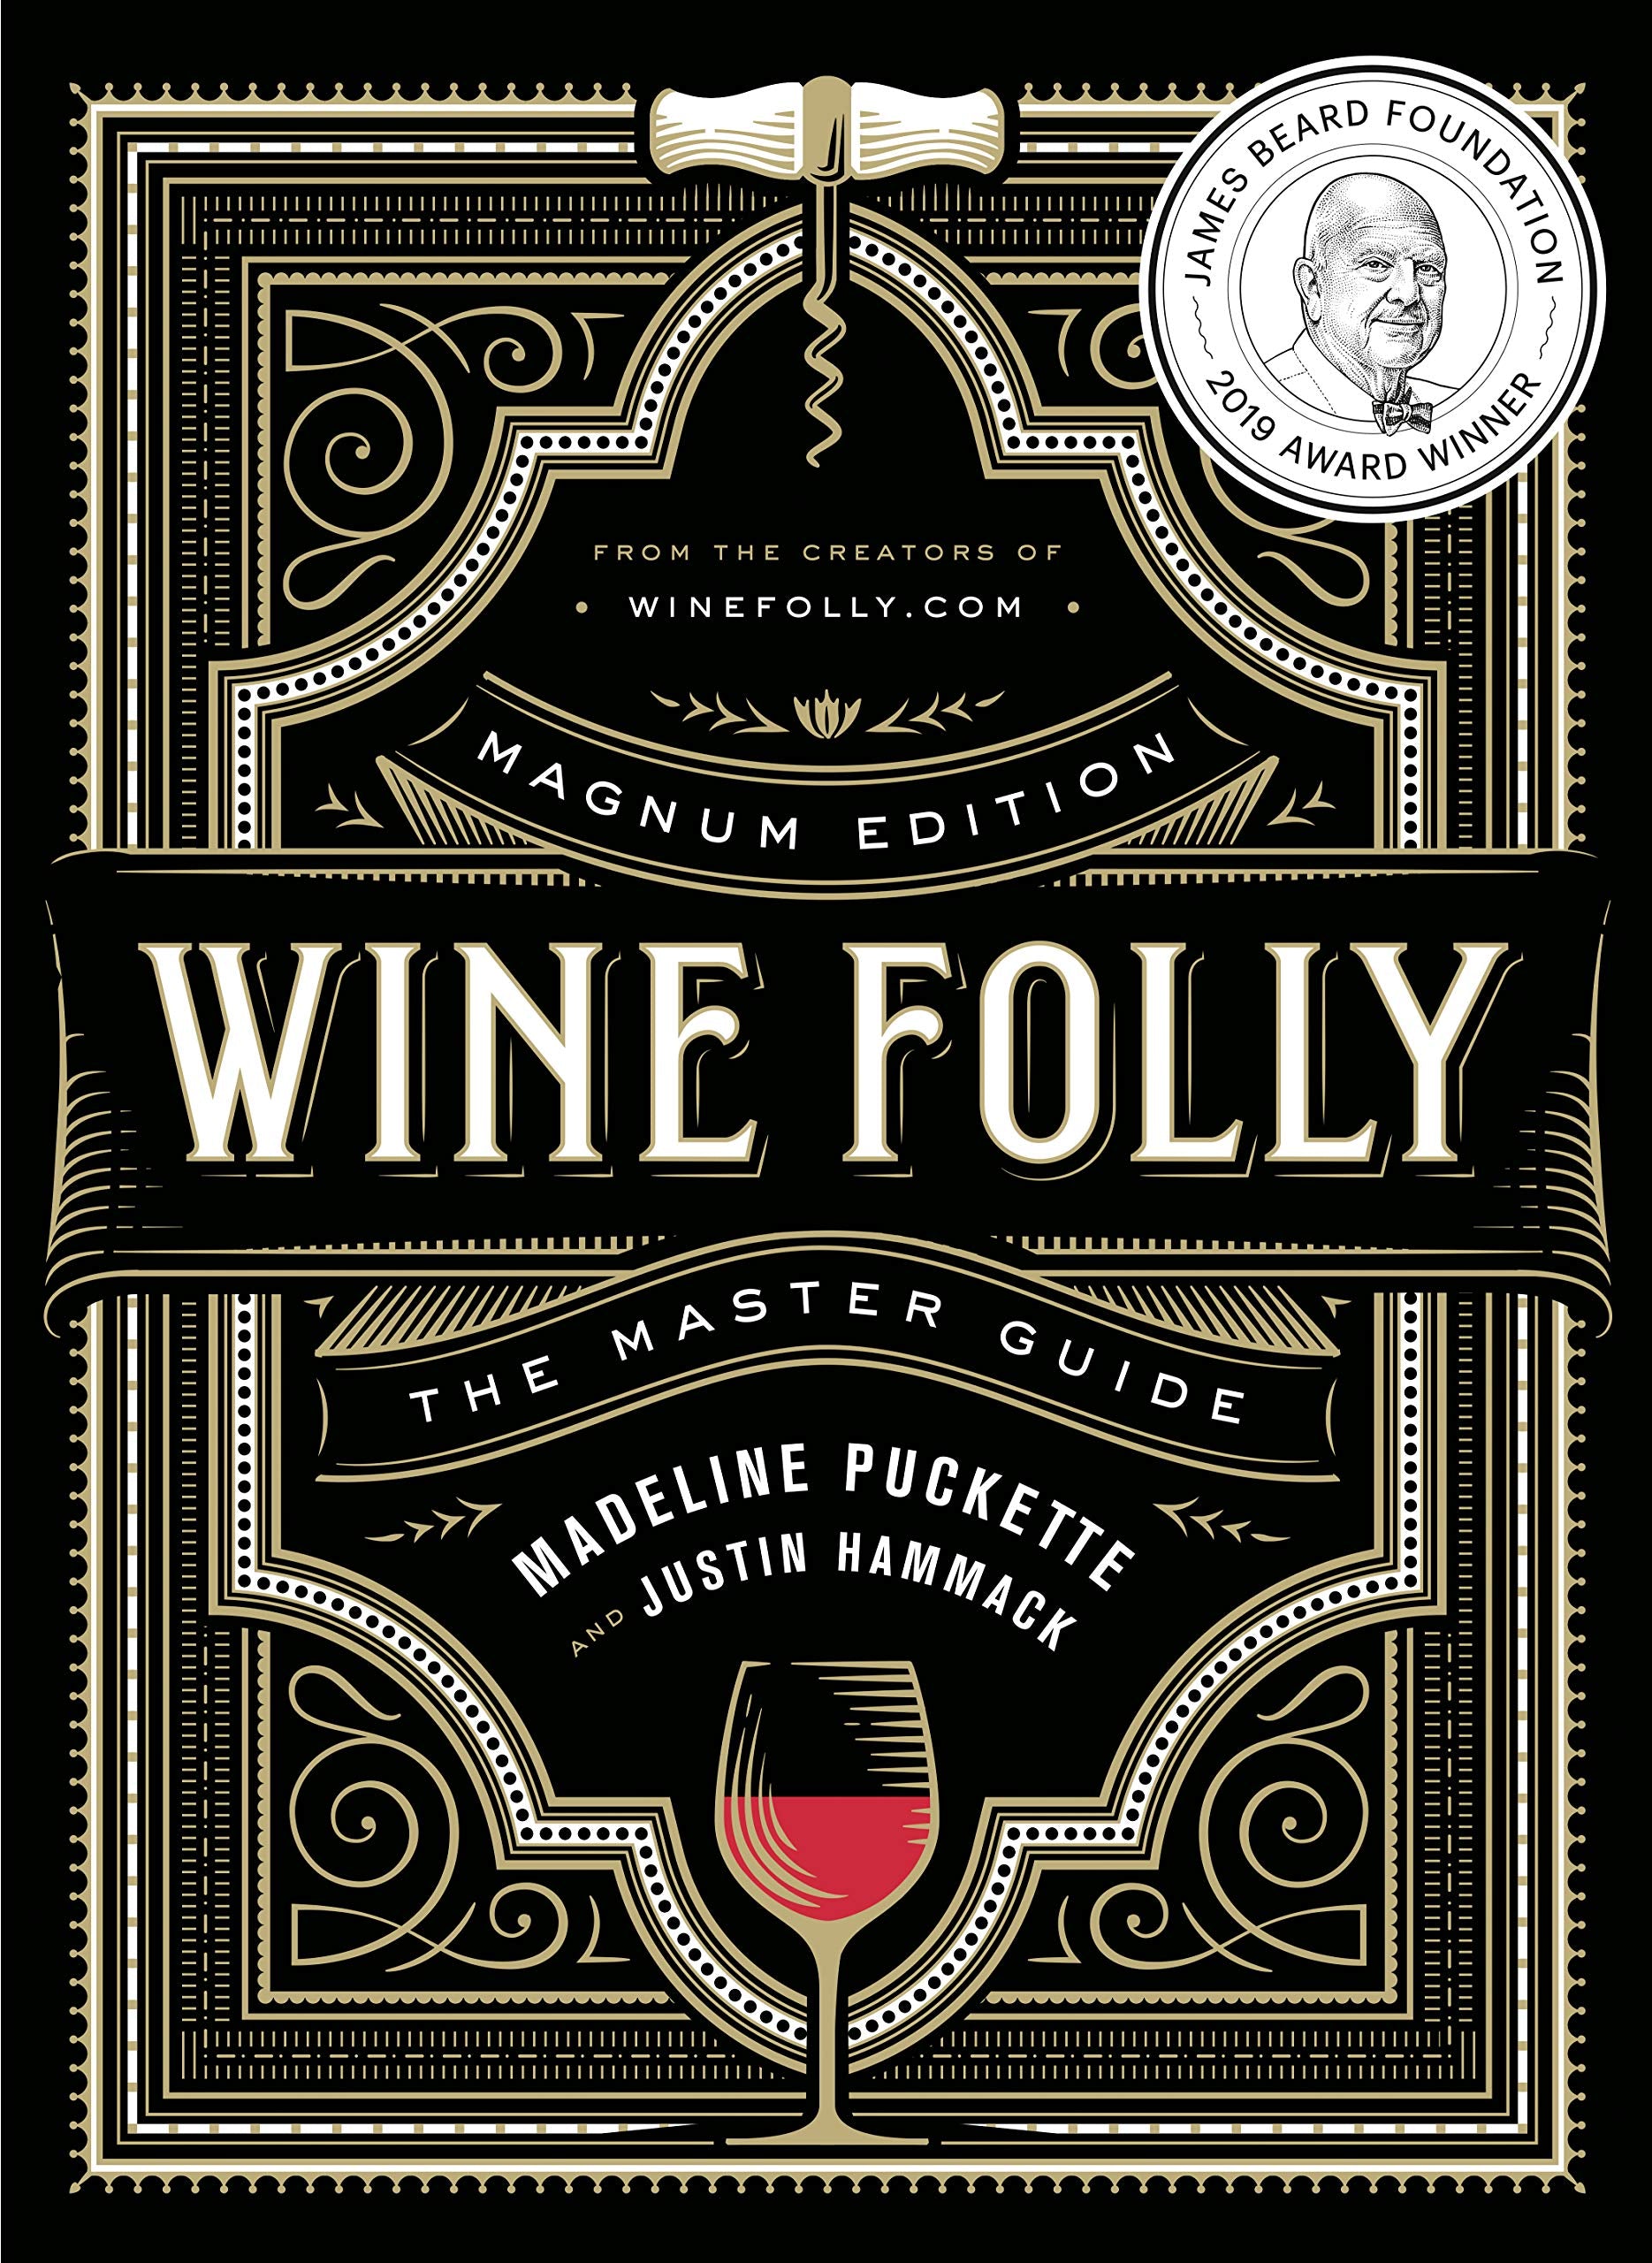 Wine Folly: Magnum Edition: The Master Guide (Madeline Puckette, Justin Hammack)